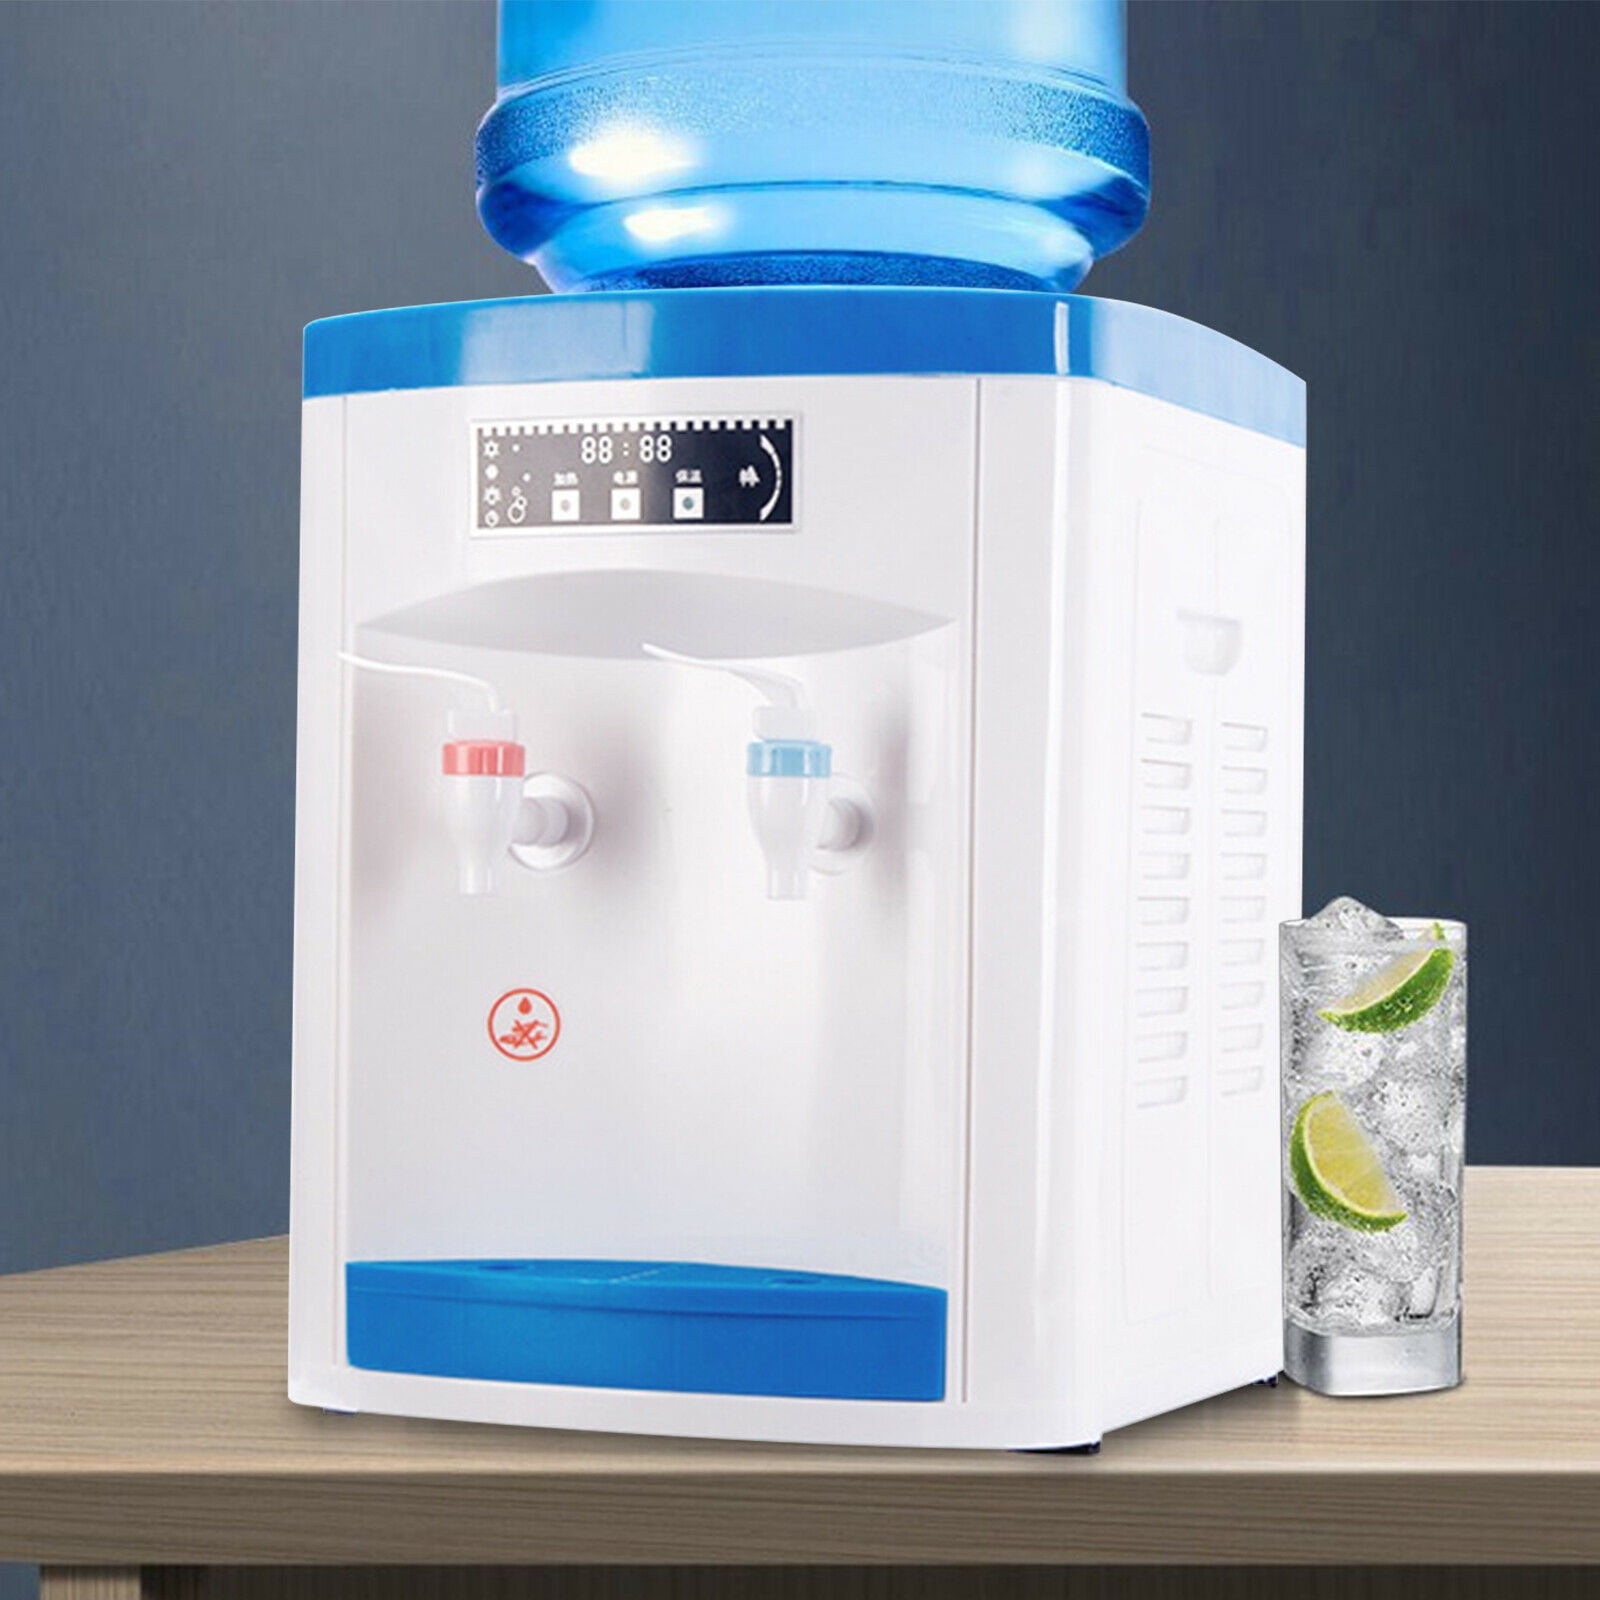 Sunpentown 4.2 Liter Hot Water Dispenser with Dual-Pump System, Off-White